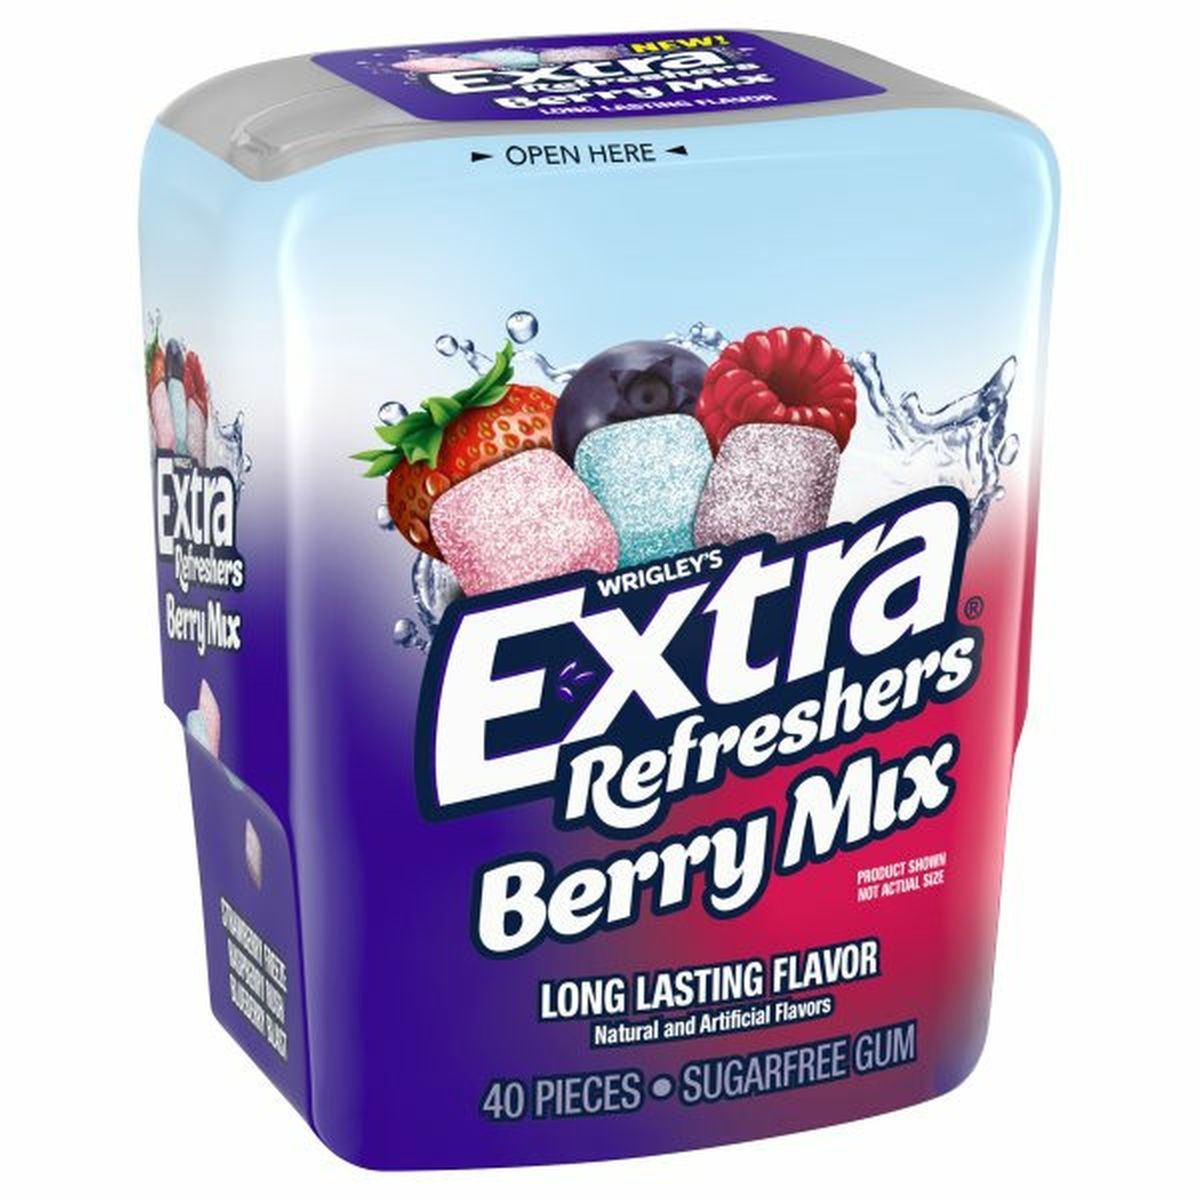 Calories in Extra Refreshers Refreshers Berry Mix Gum Piece Bottle